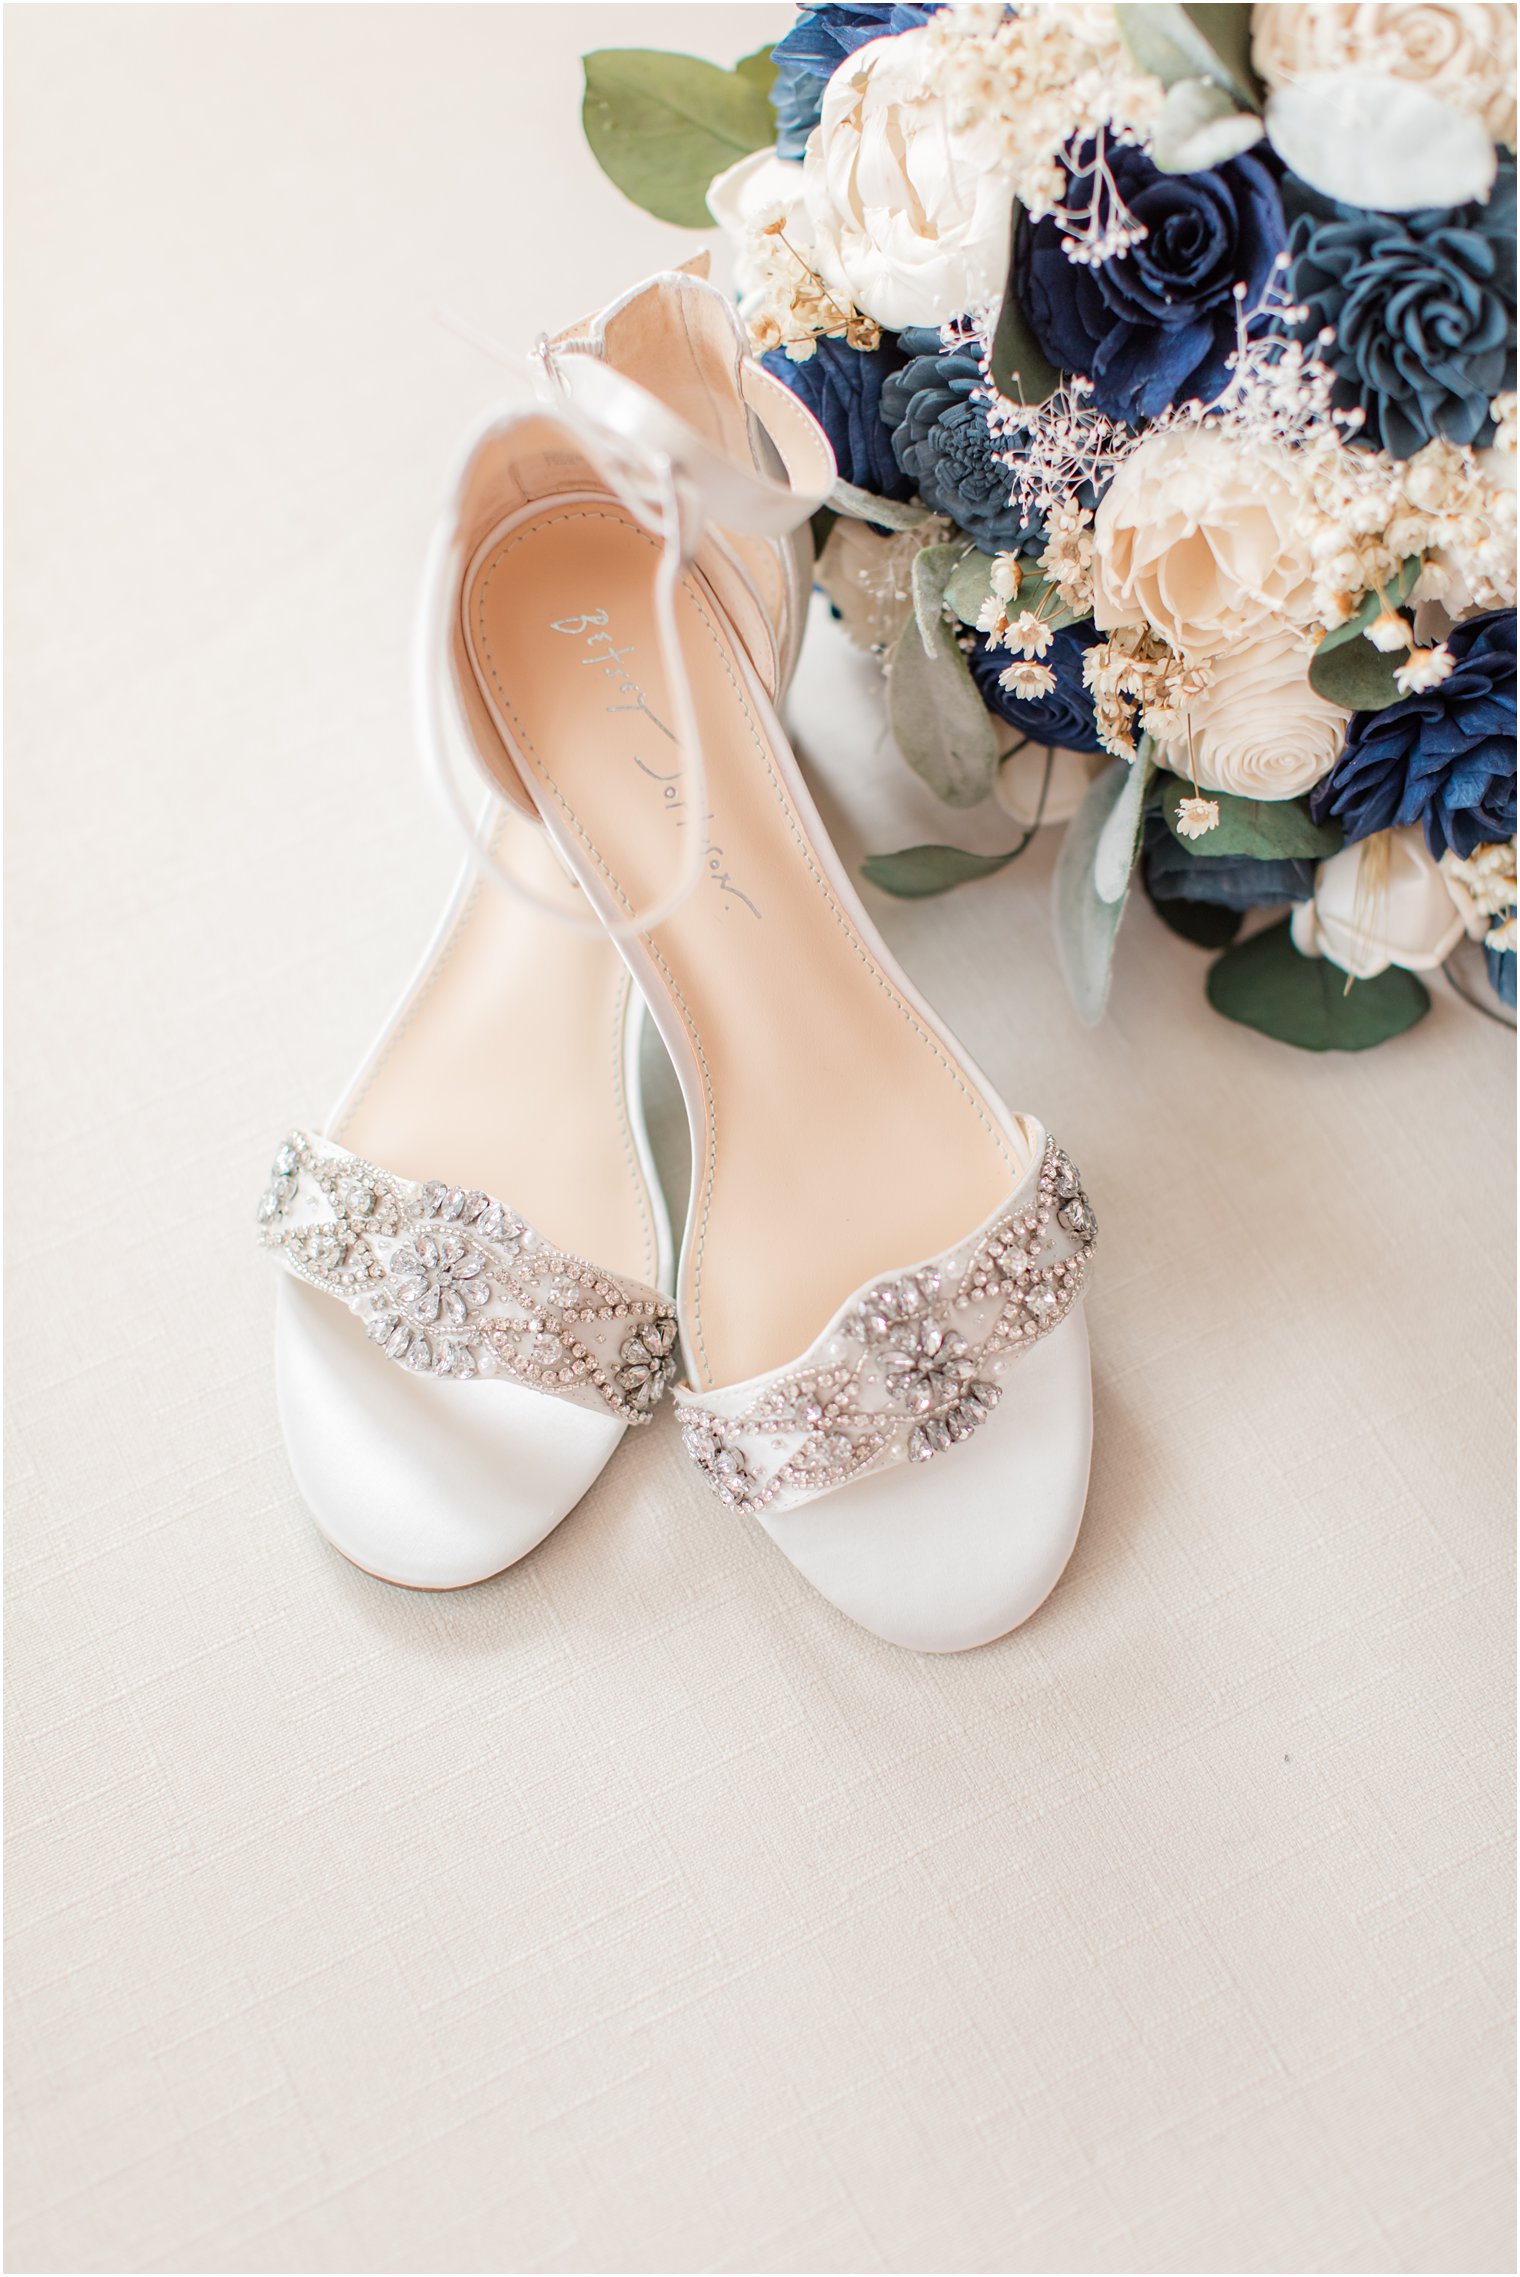 bride's shoes with bouquet of white and blue wooden flowers 